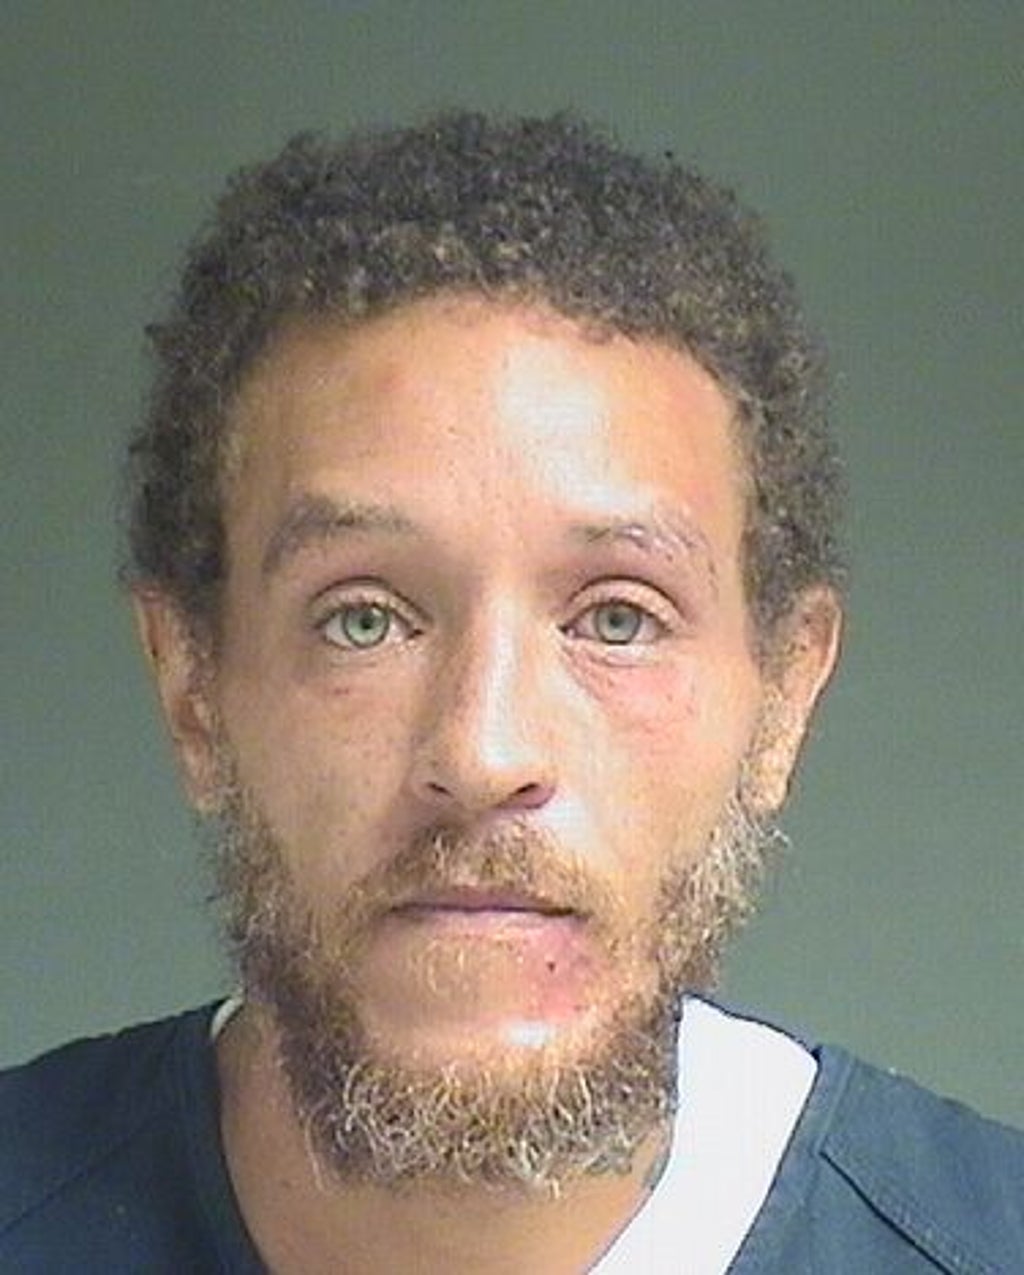 Former NBA star Delonte West arrested a year after Mark Cuban ‘saved him’ when panhandling photo went viral